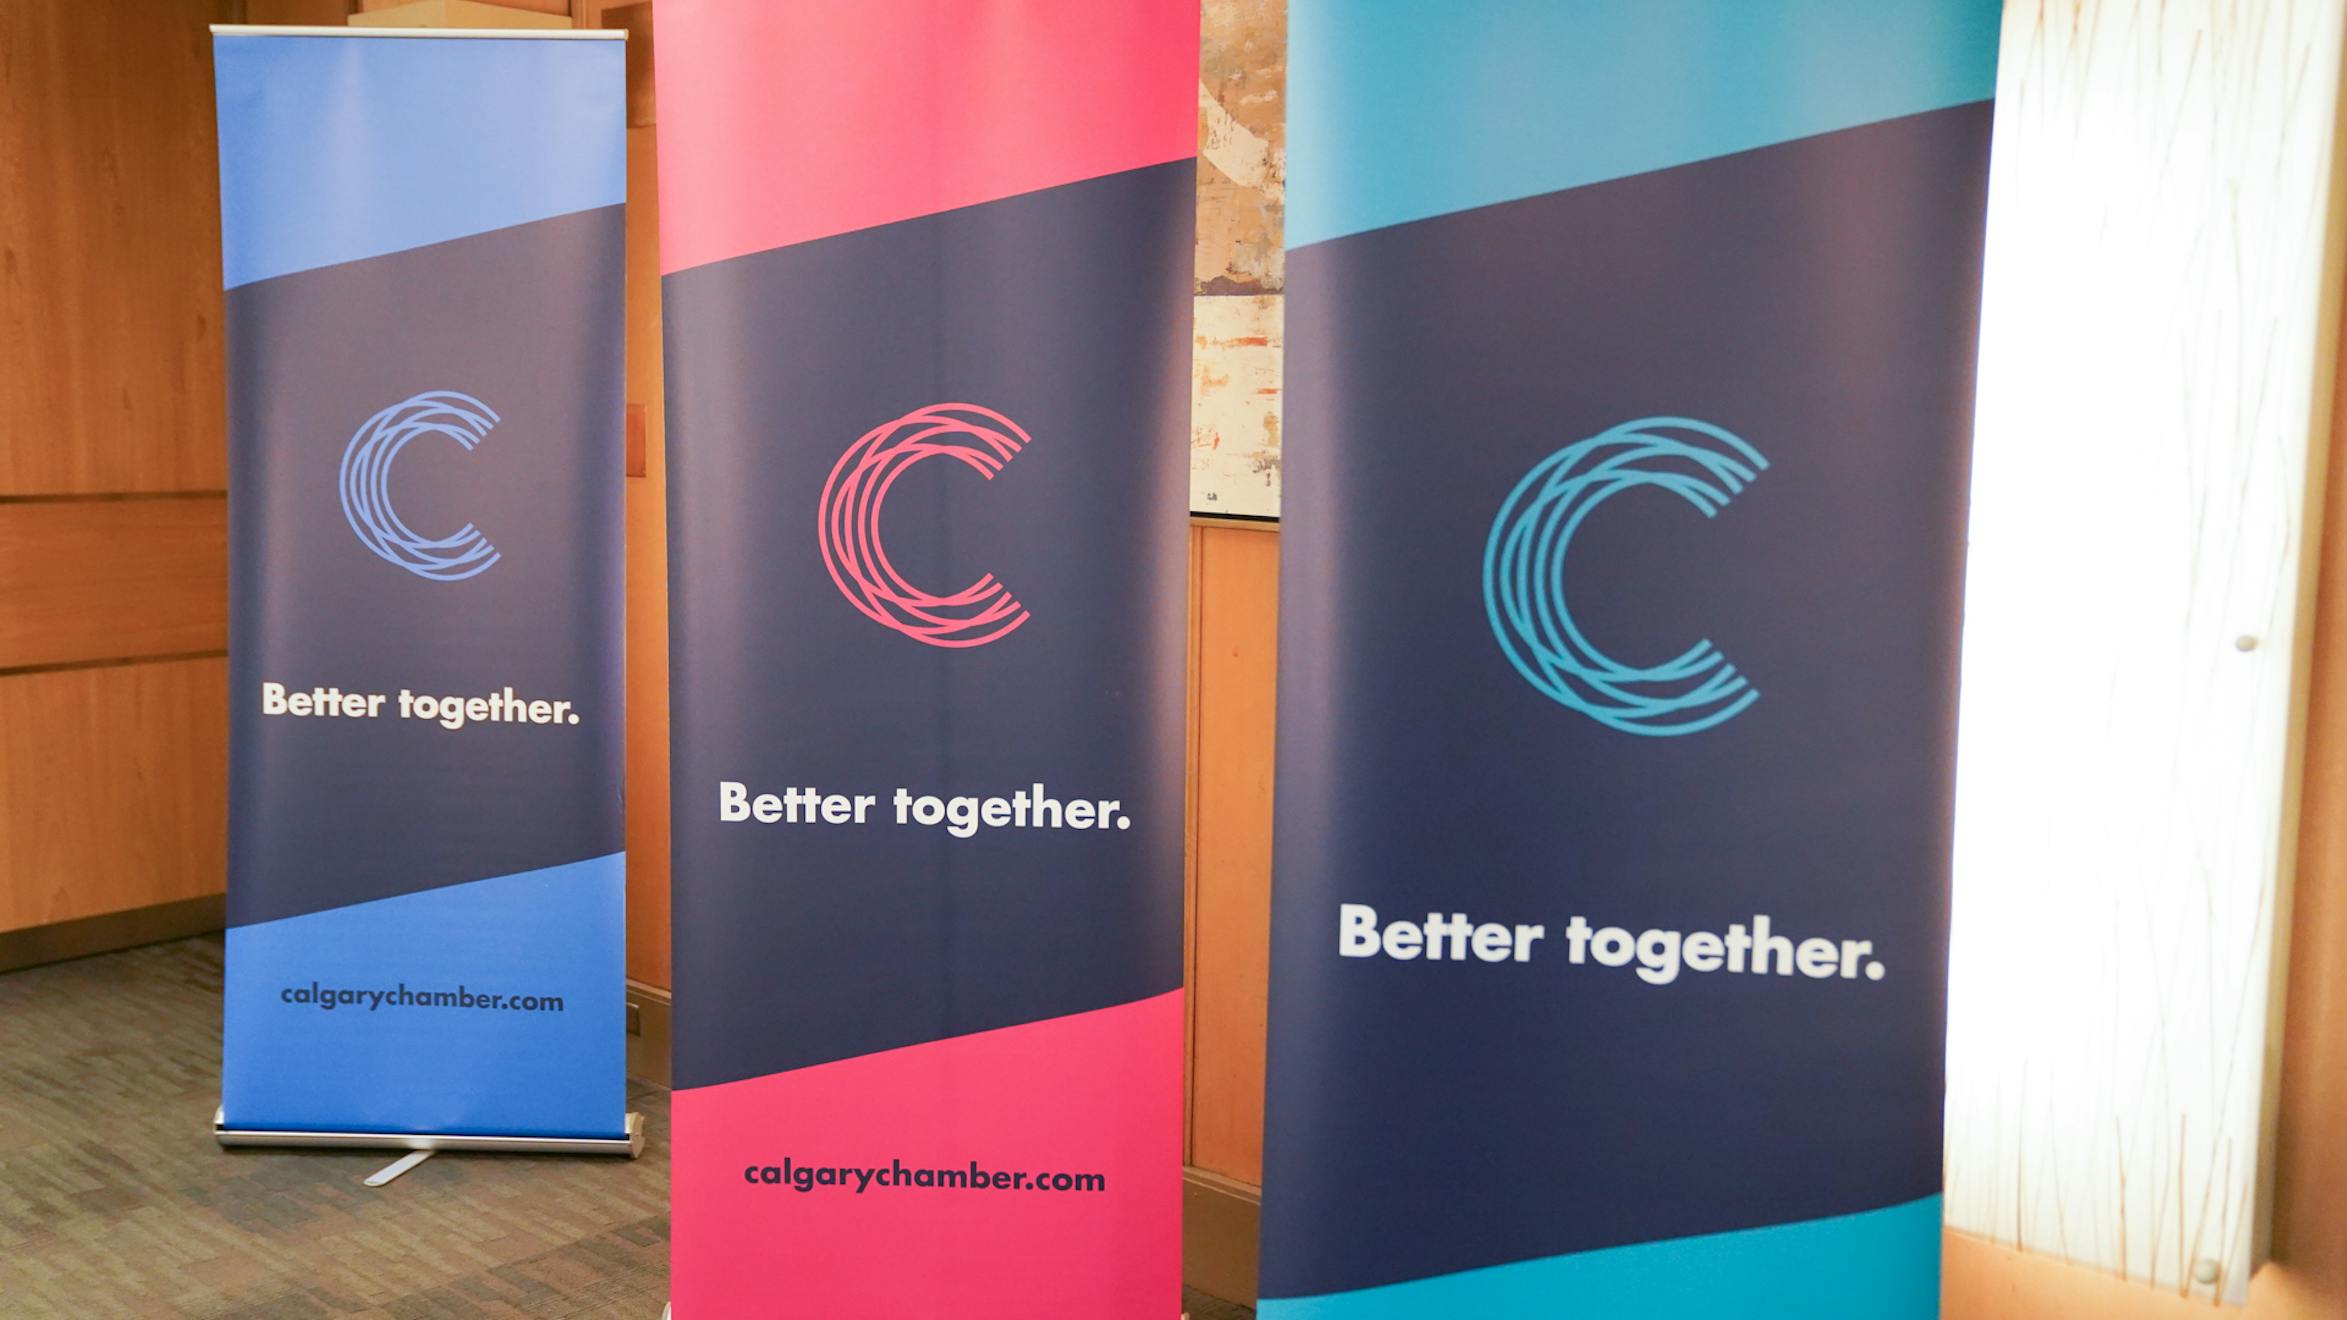 better together calgary chamber